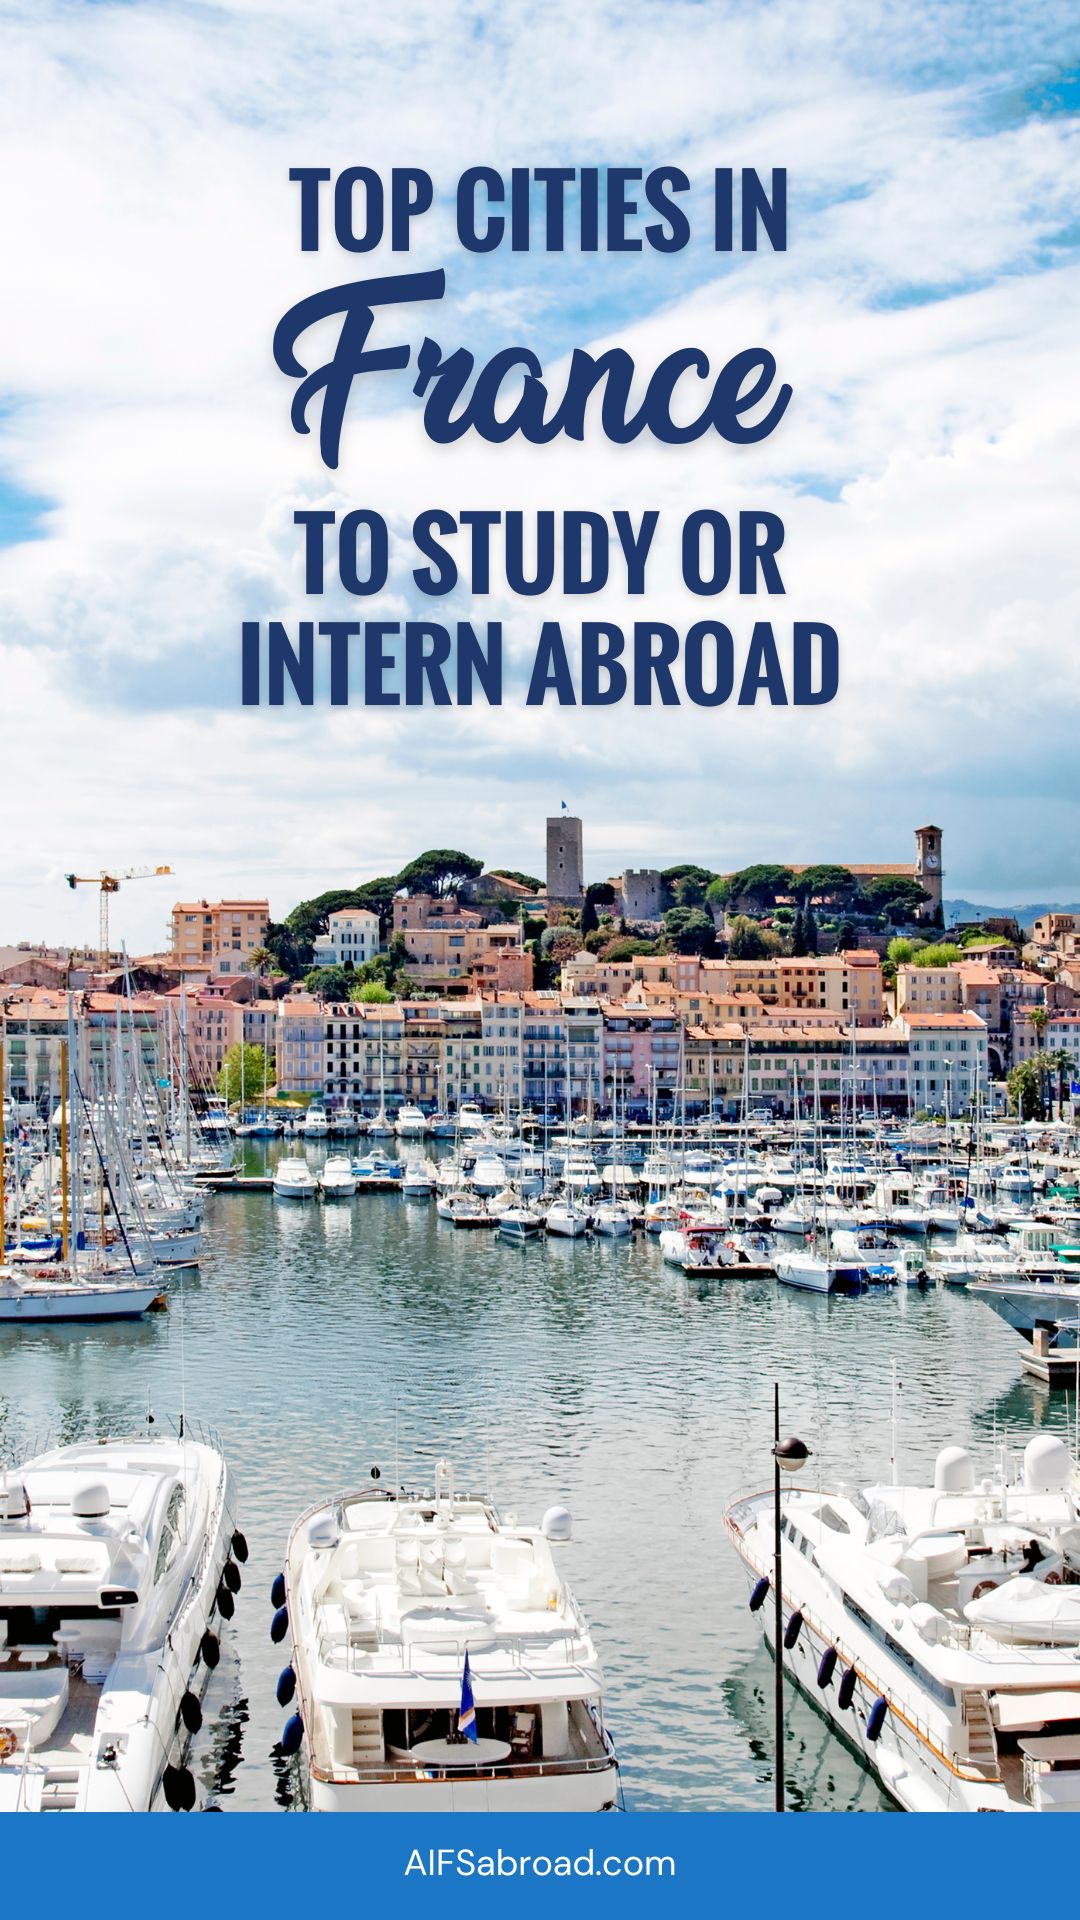 Pin image: Cannes, France harbor with text sayiyg "Top cities in France to study or intern abroad"